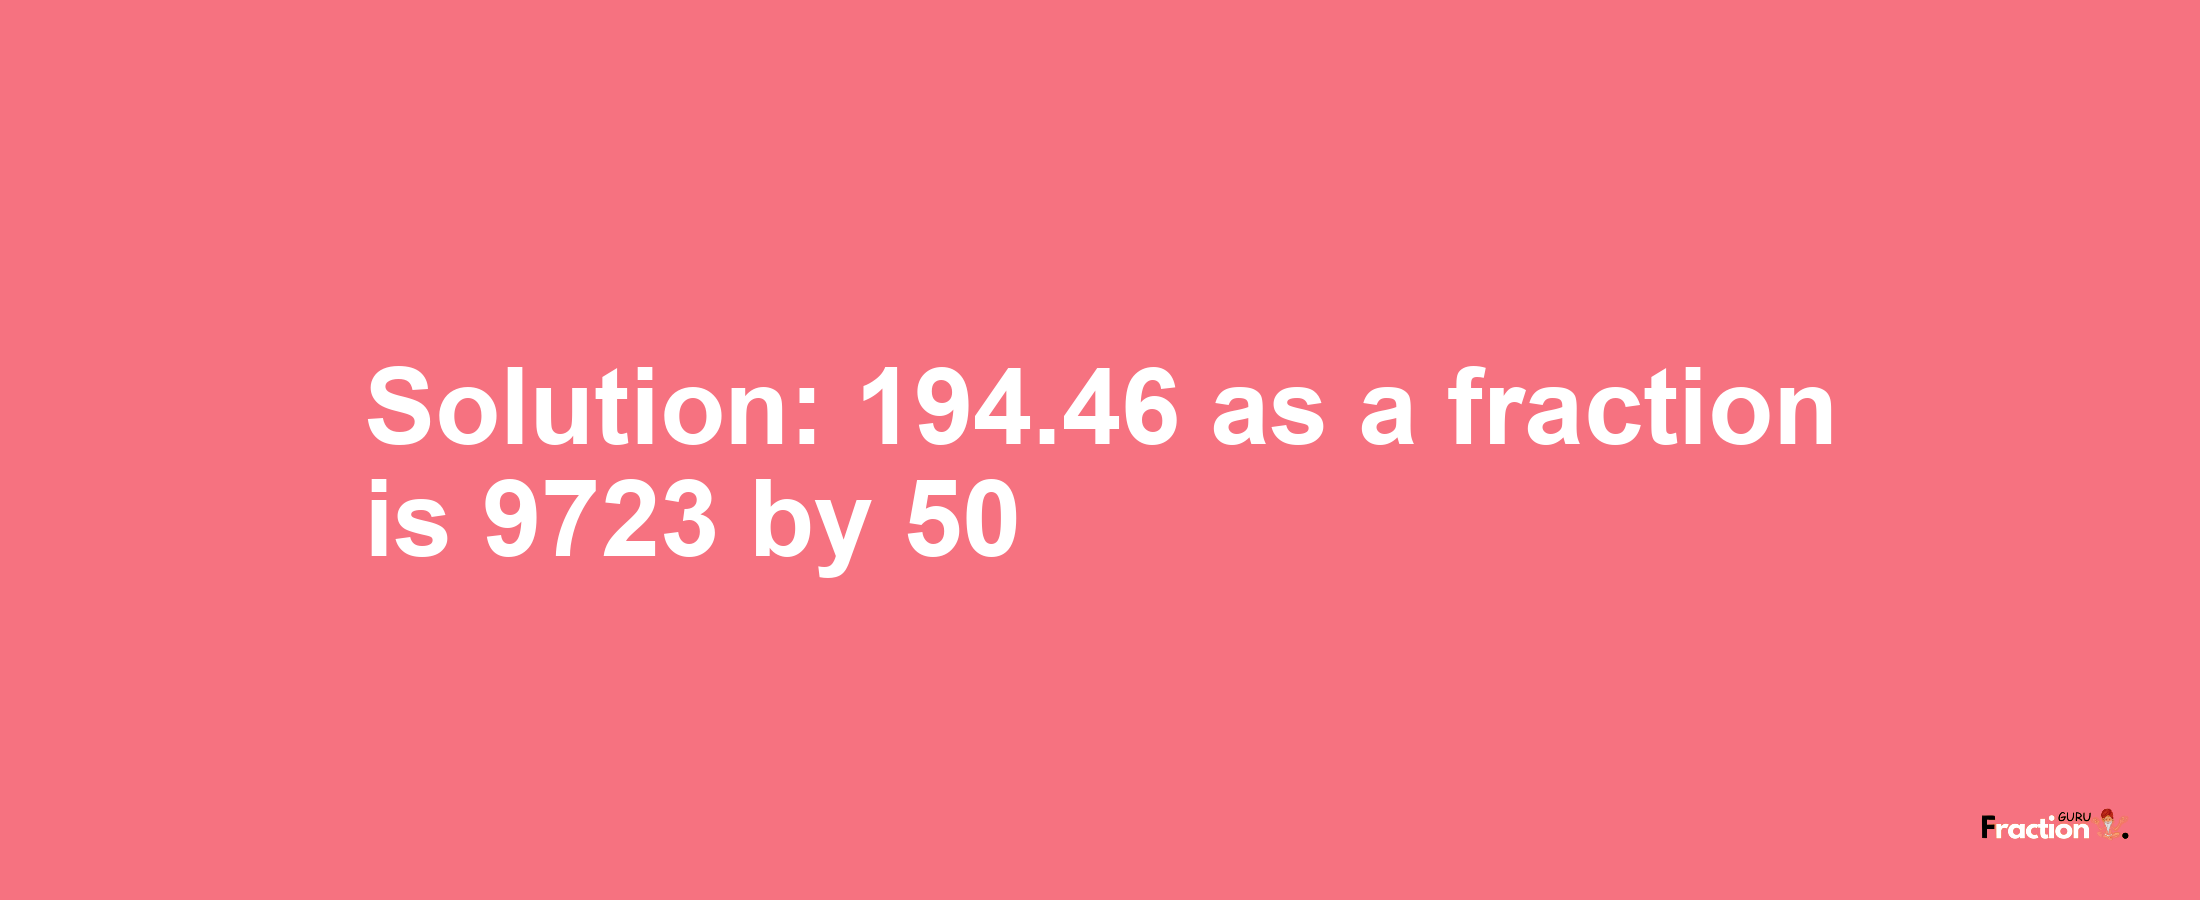 Solution:194.46 as a fraction is 9723/50